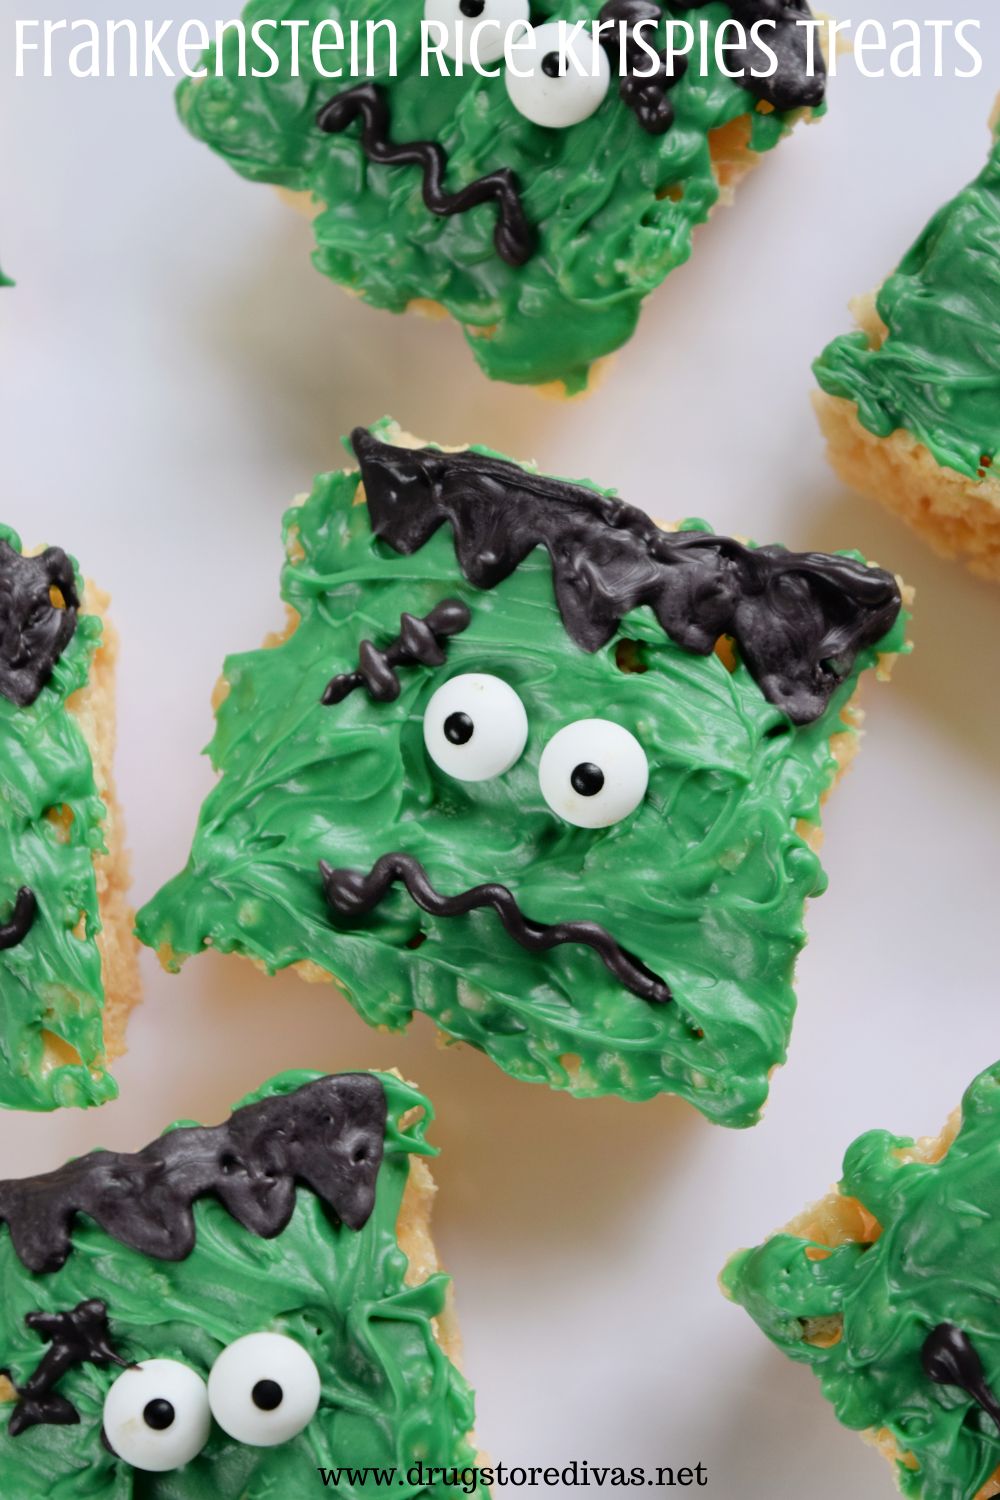 Six Rice Krispies treats decorated to look like Frankenstein, on a white tray, with the words 